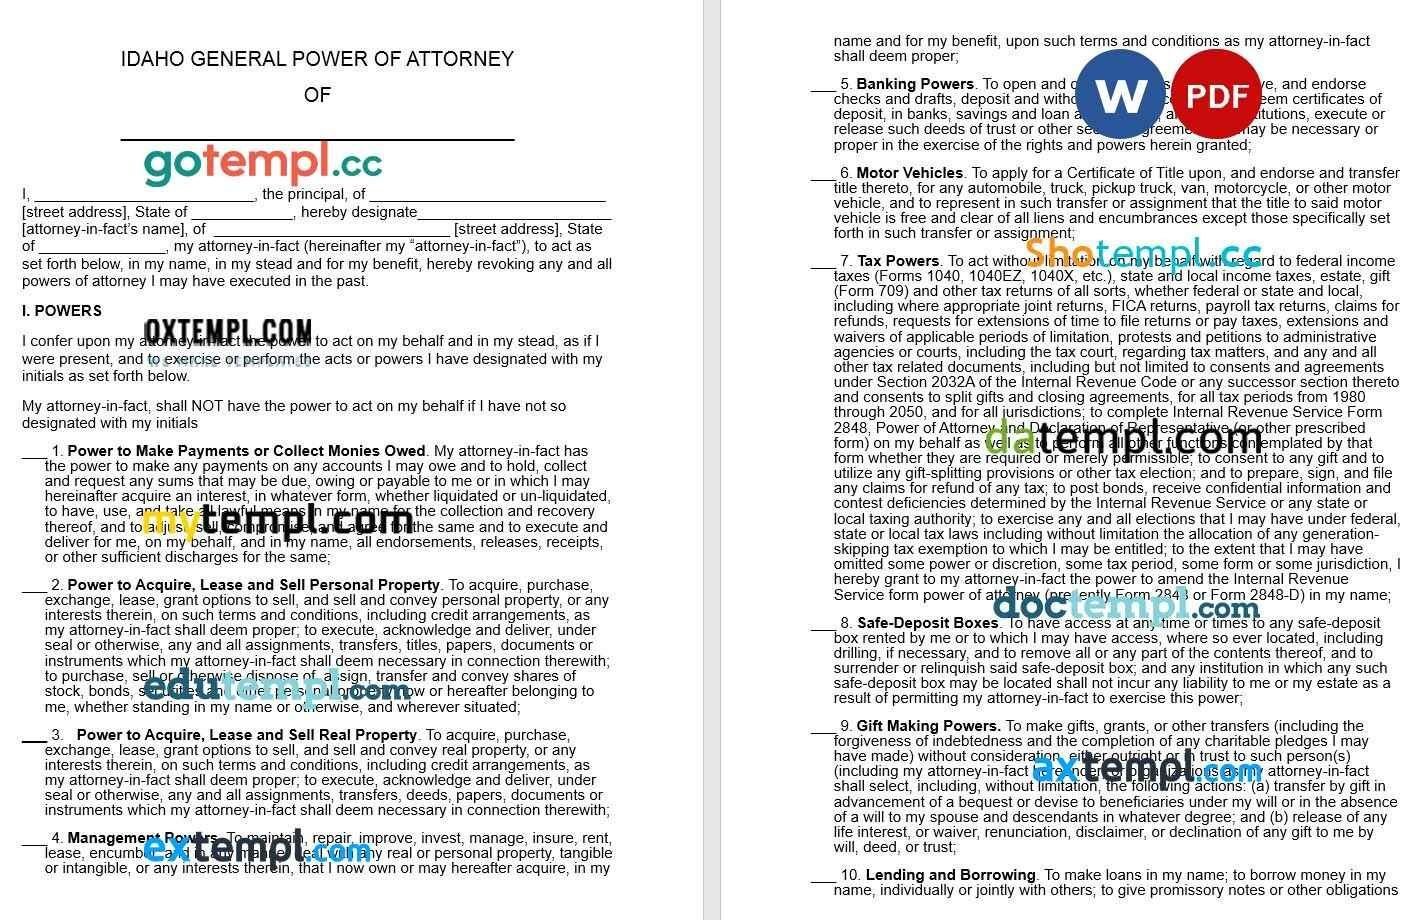 Idaho General Power of Attorney example, fully editable